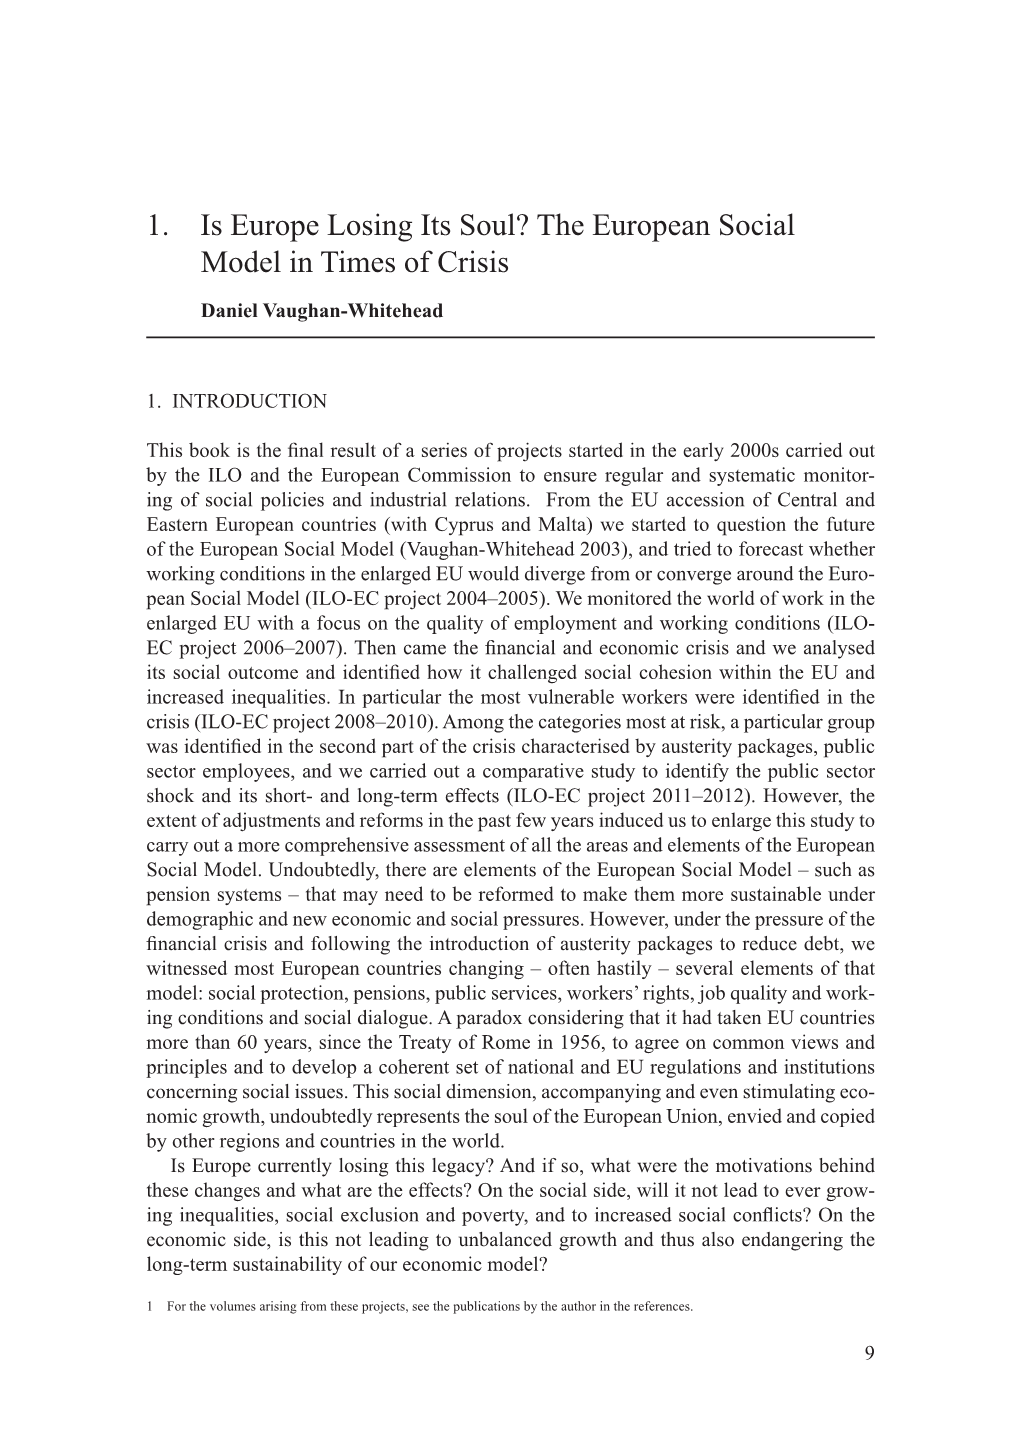 The European Social Model in Times of Crisis